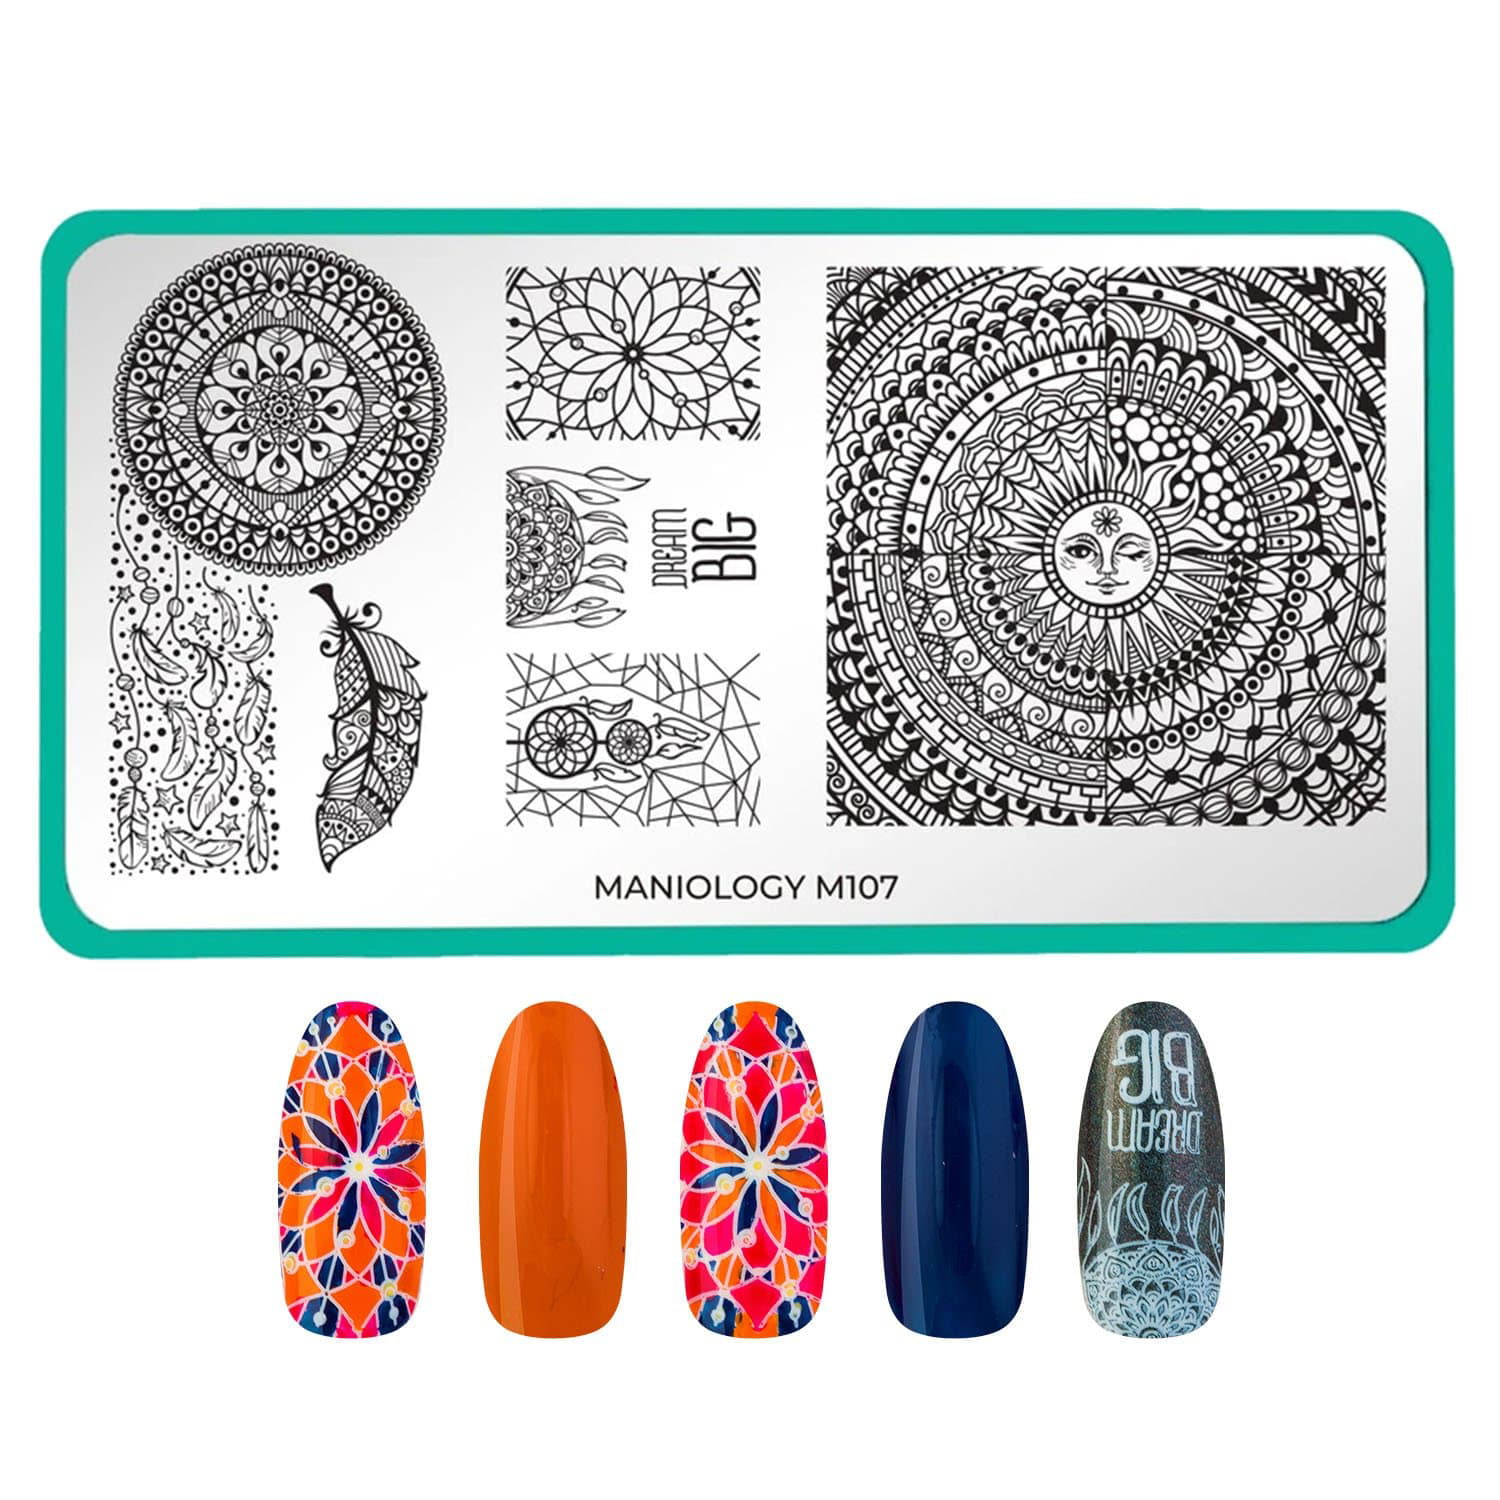 Feeling Lucky? (CjS H-50) - Nail Stamping Plate